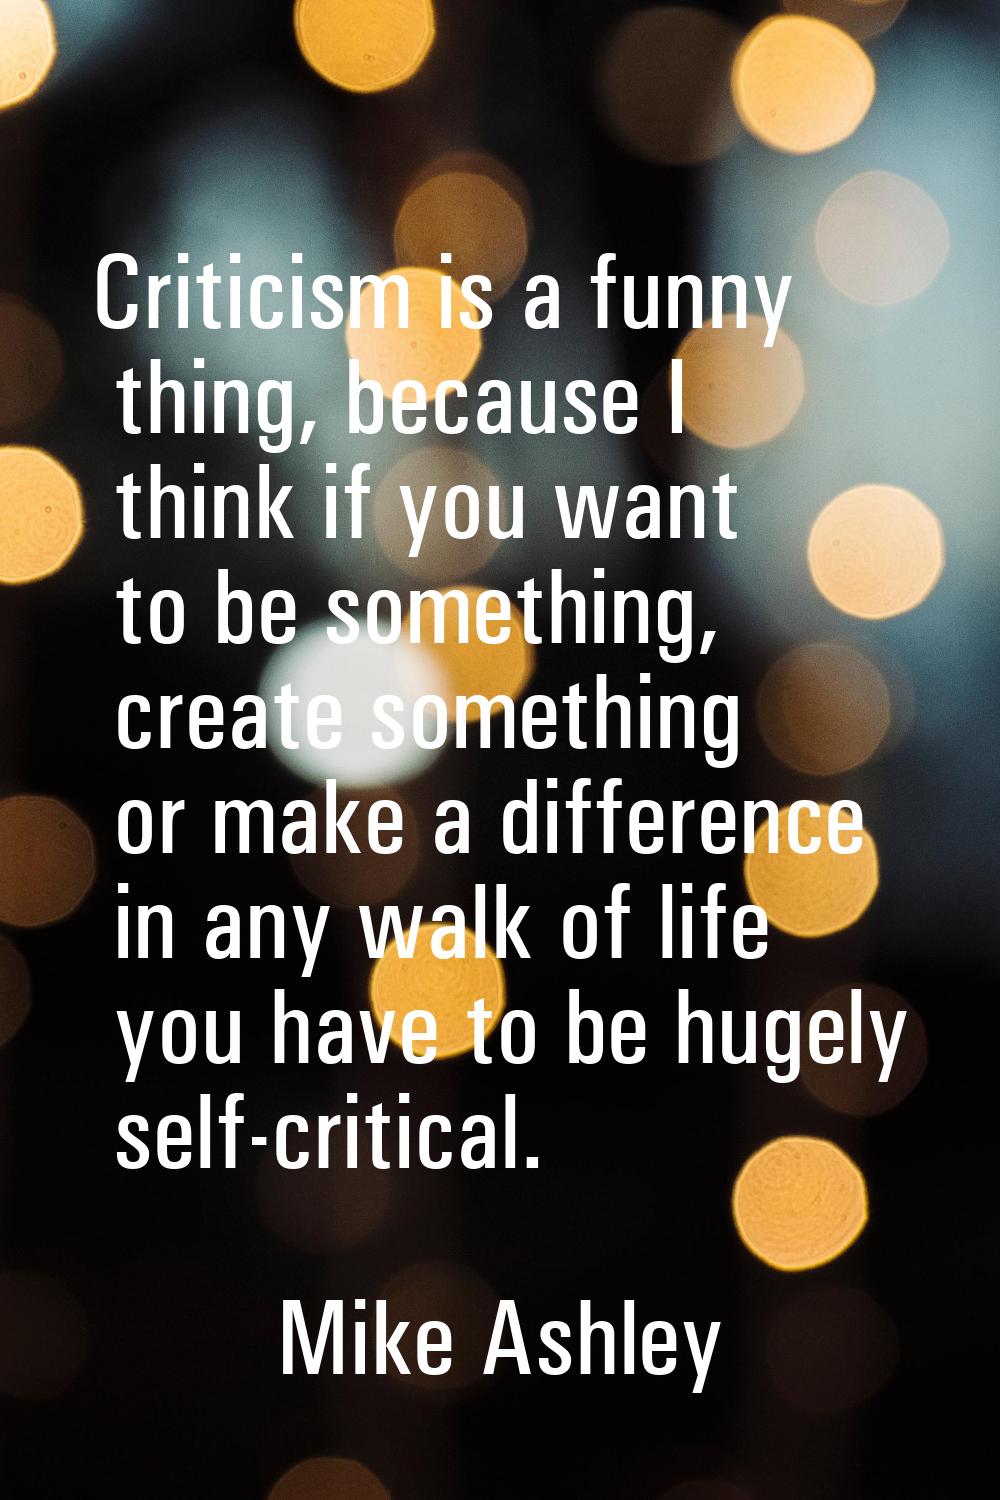 Criticism is a funny thing, because I think if you want to be something, create something or make a